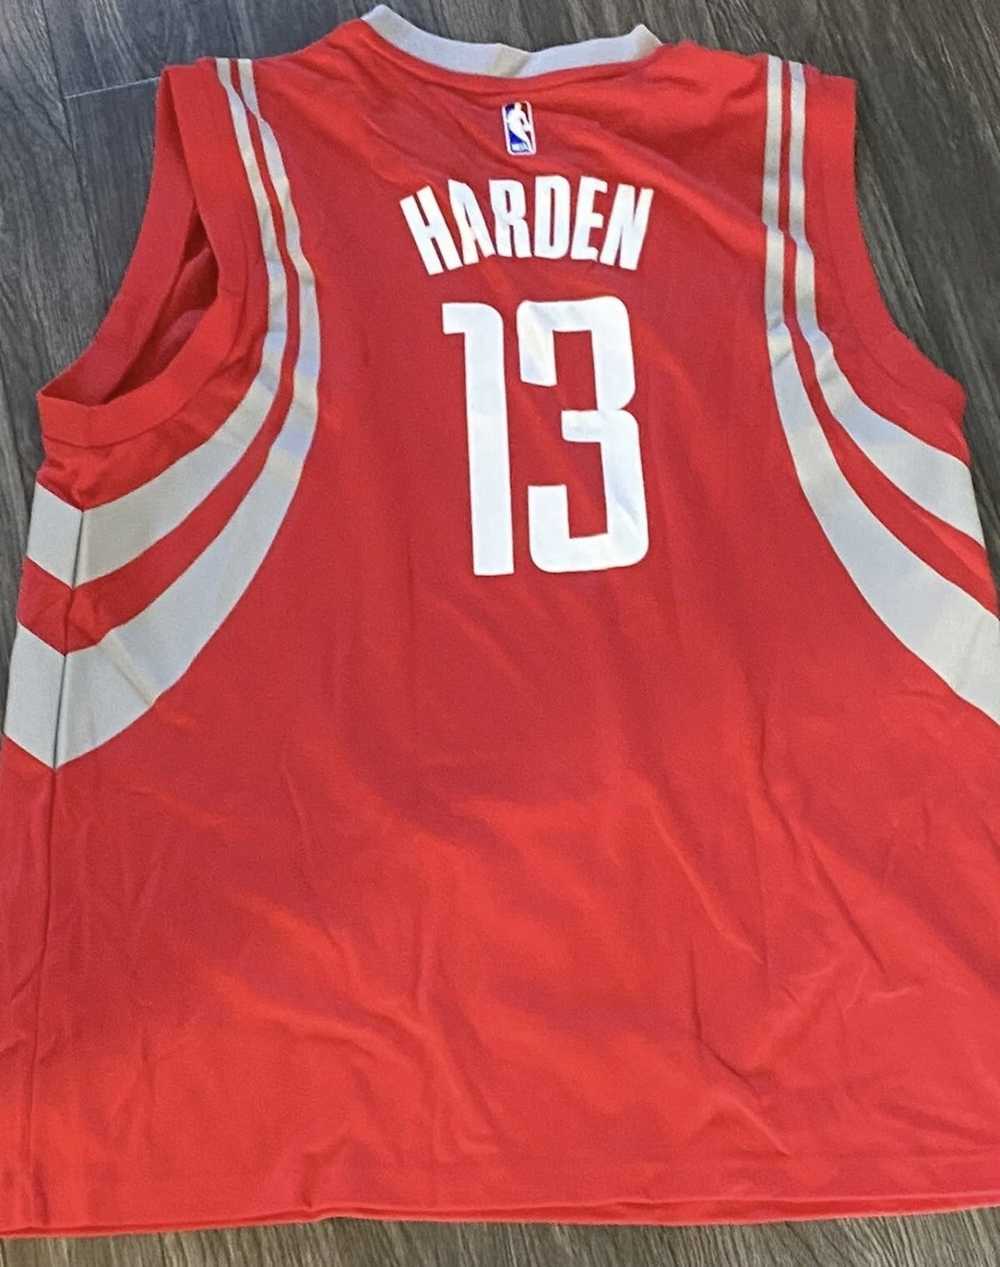 James Harden Red Houston Rockets Adidas Jersey (Size L)